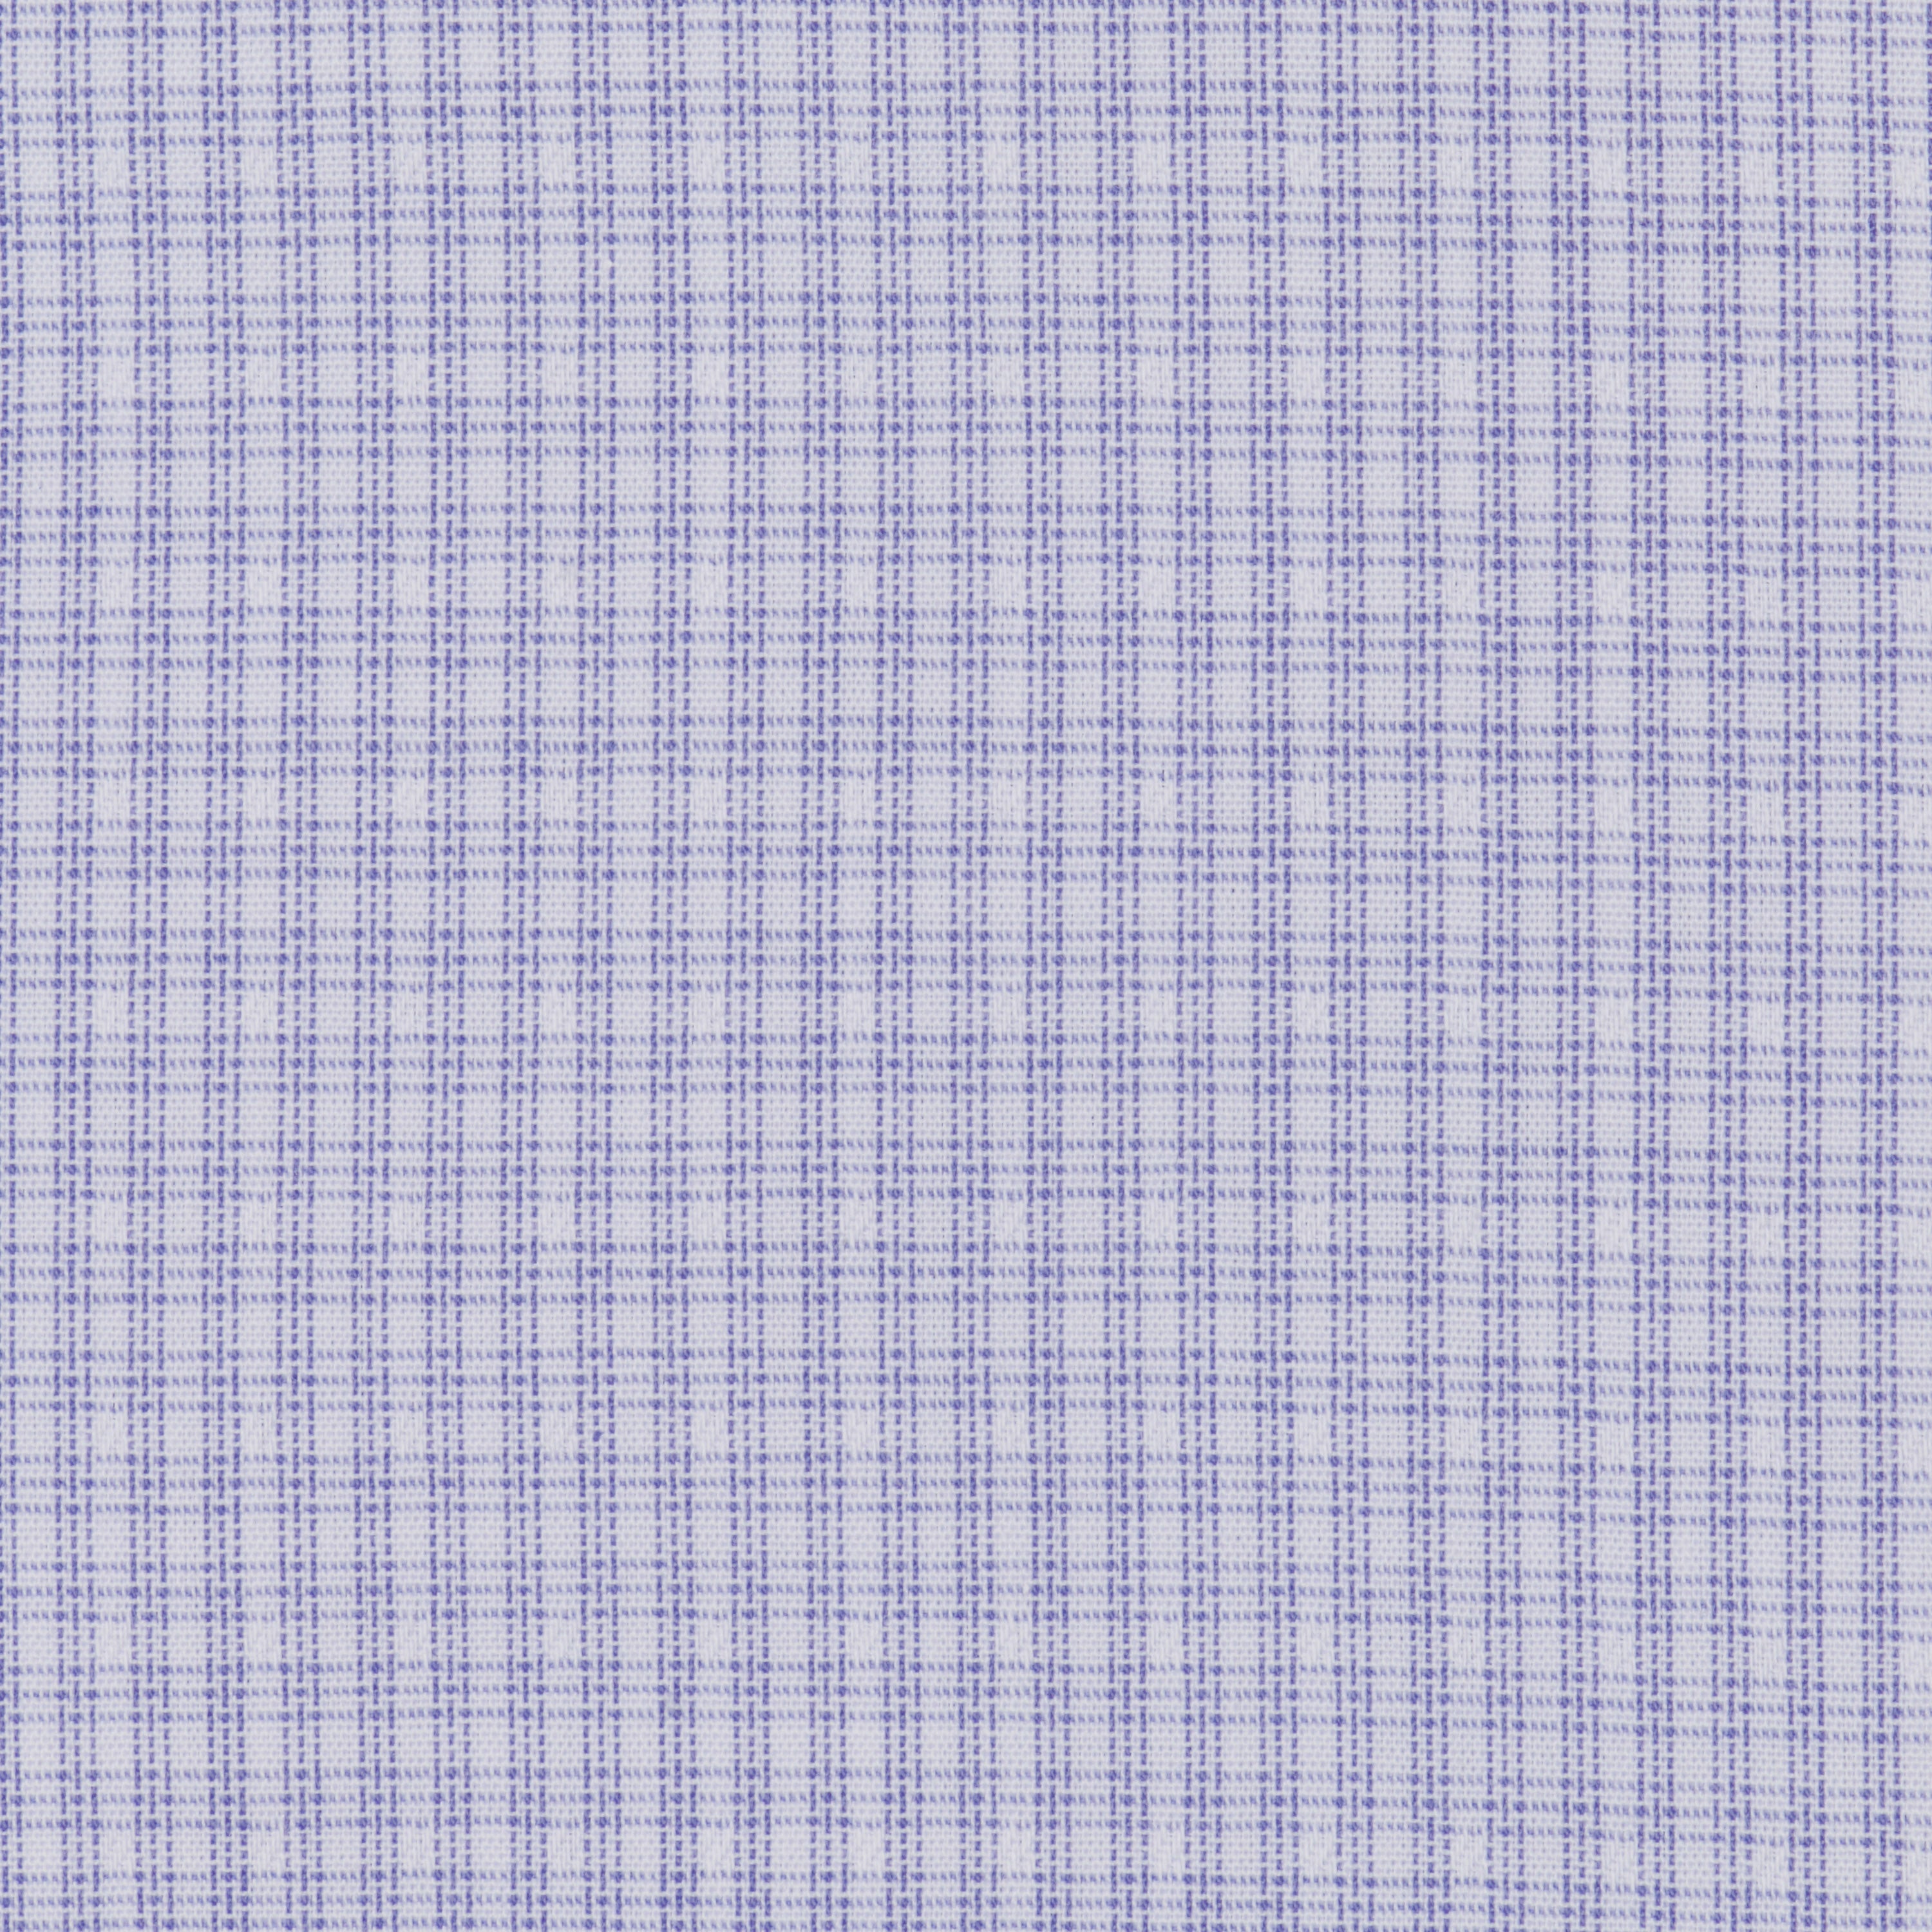 028 TF SC - Violet College Check Tailored Fit Spread Collar